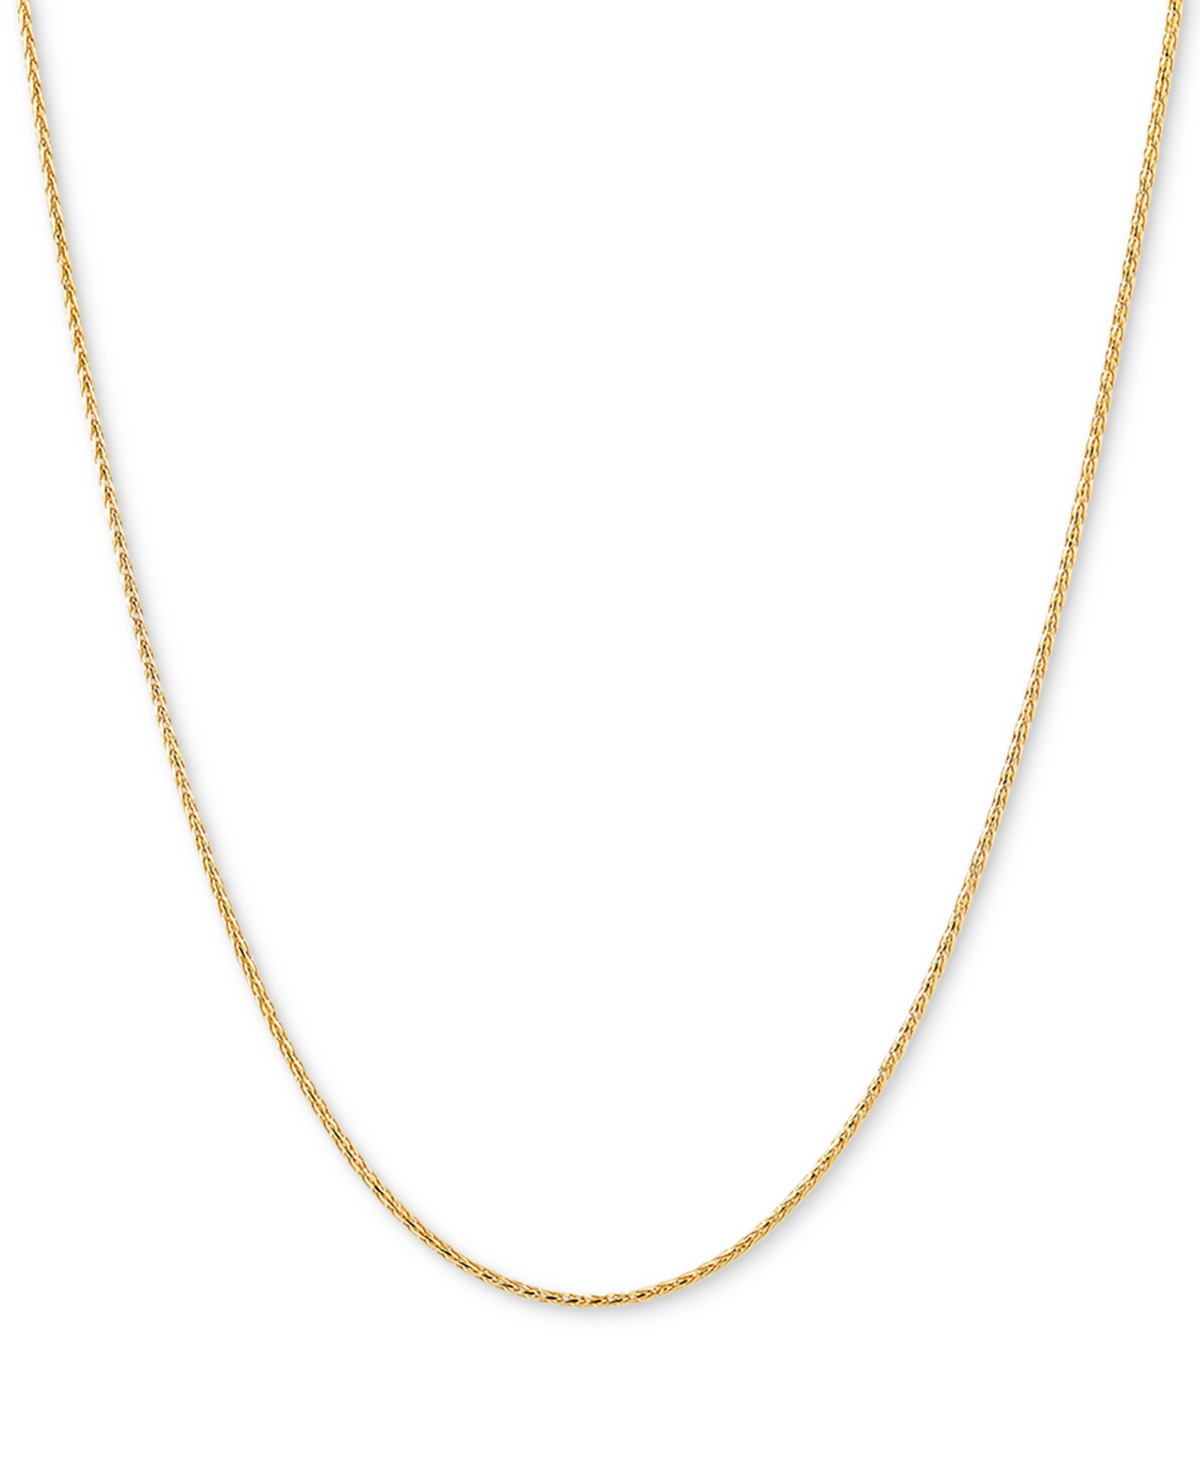 Italian Gold Wheat Link 20" Chain Necklace In 14k Gold In Yellow Gold